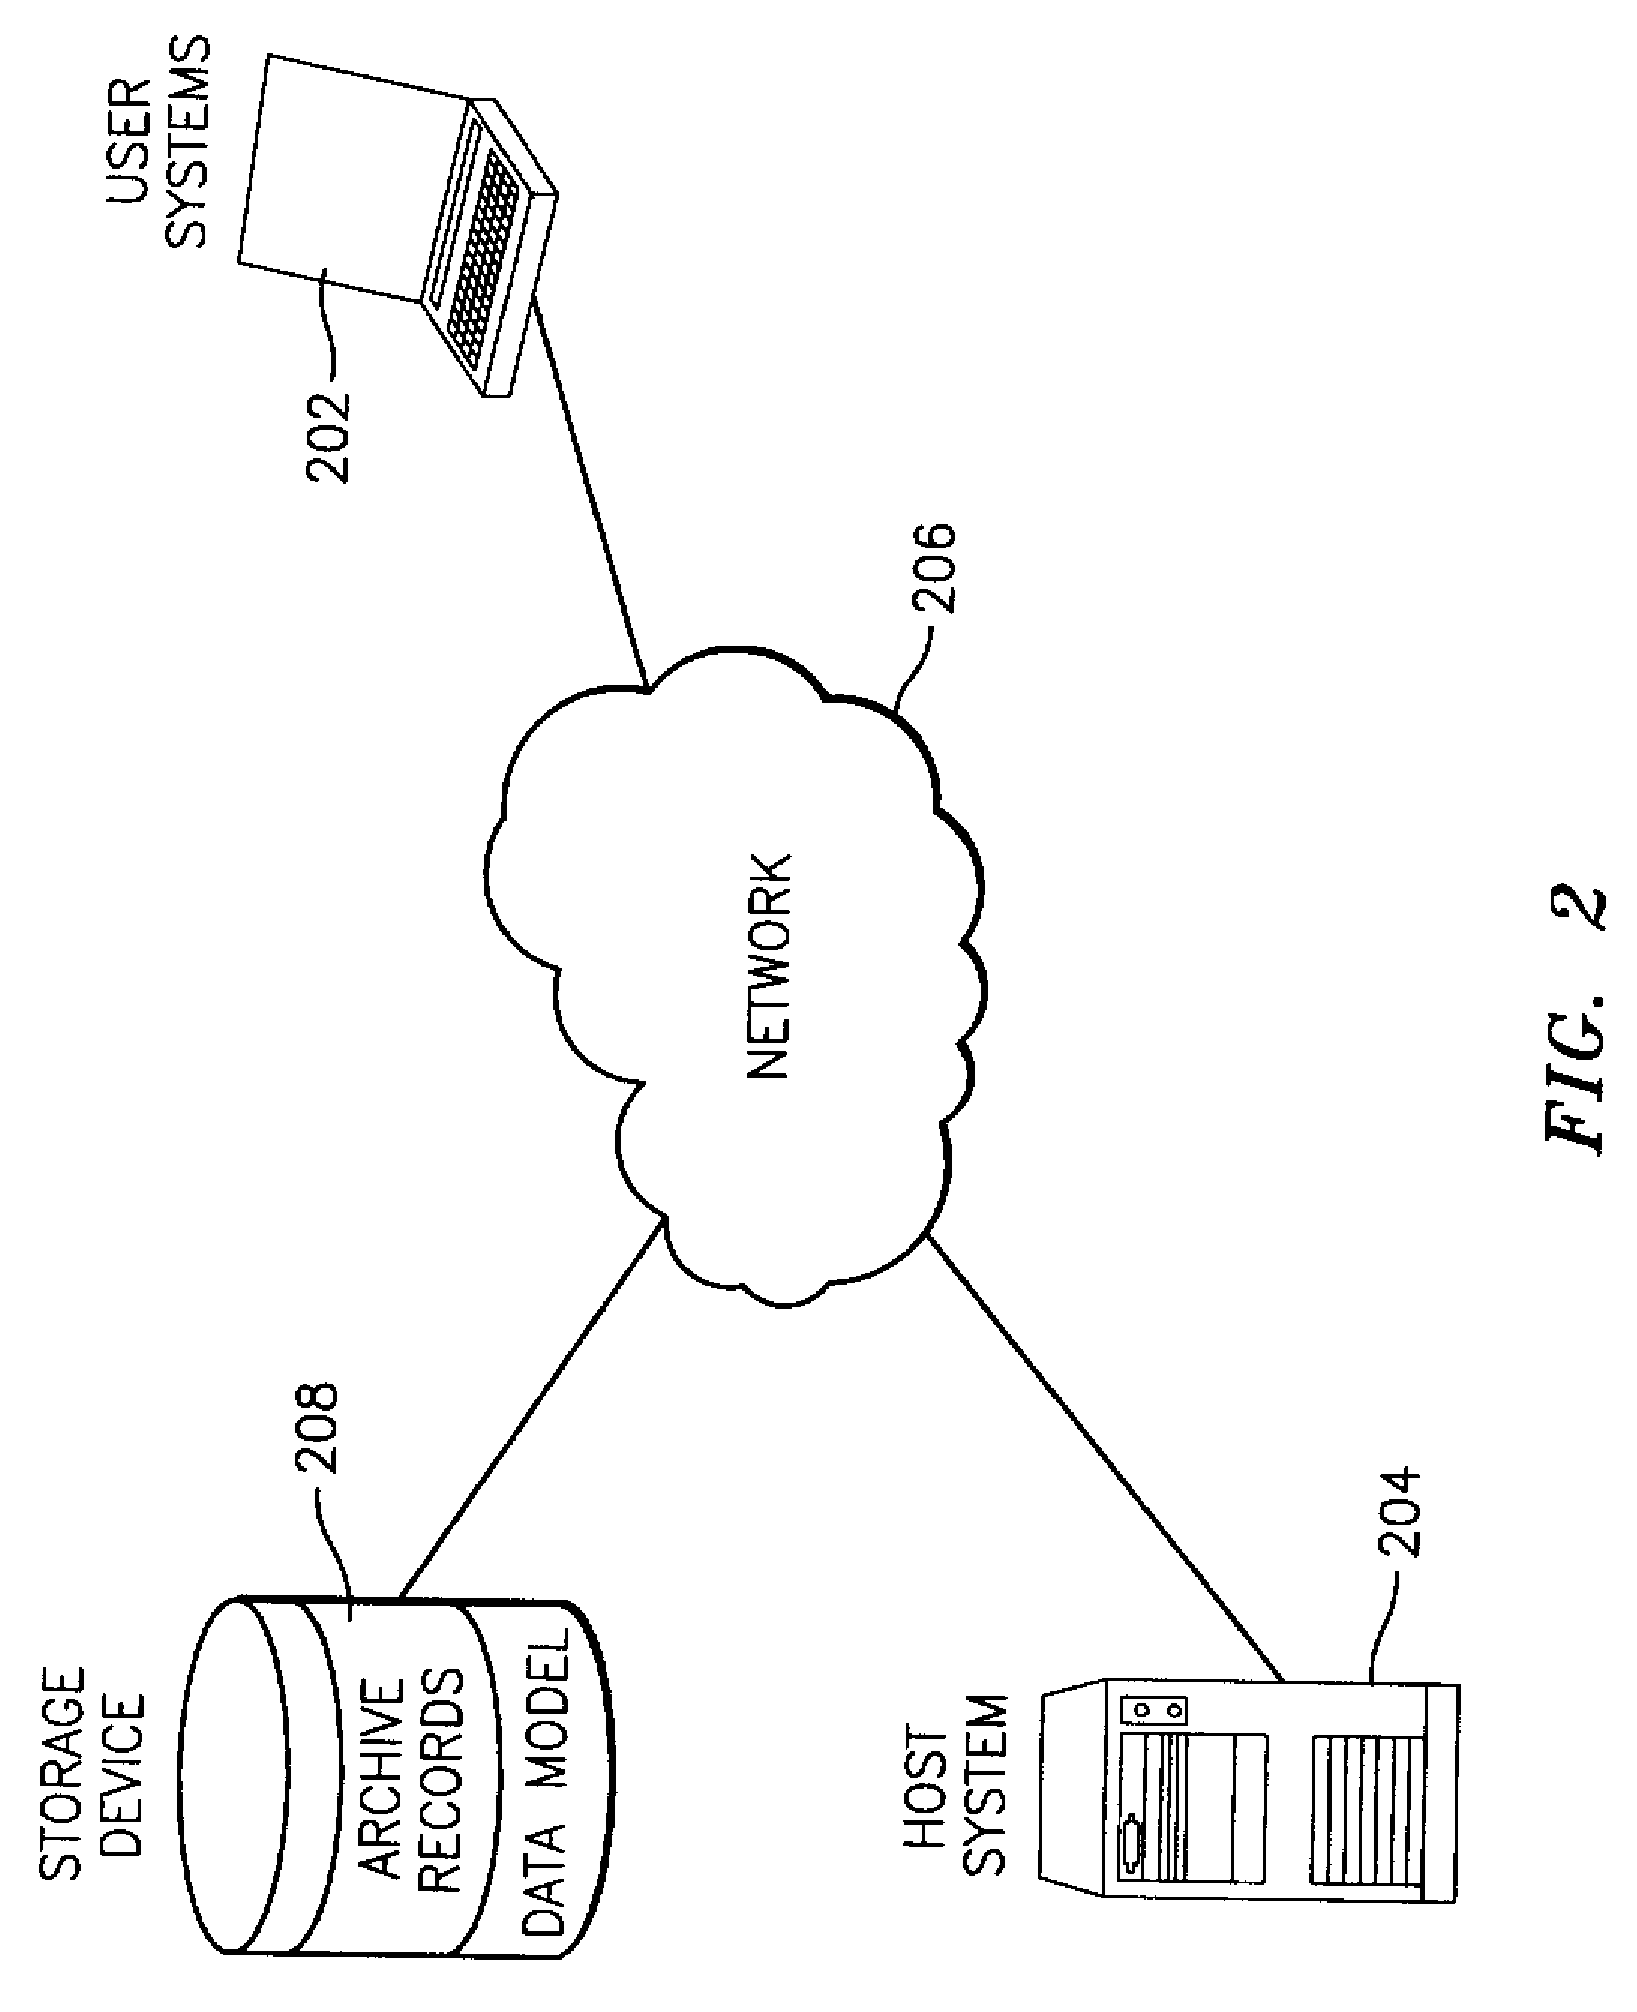 Retrieving case-based reasoning information from archive records